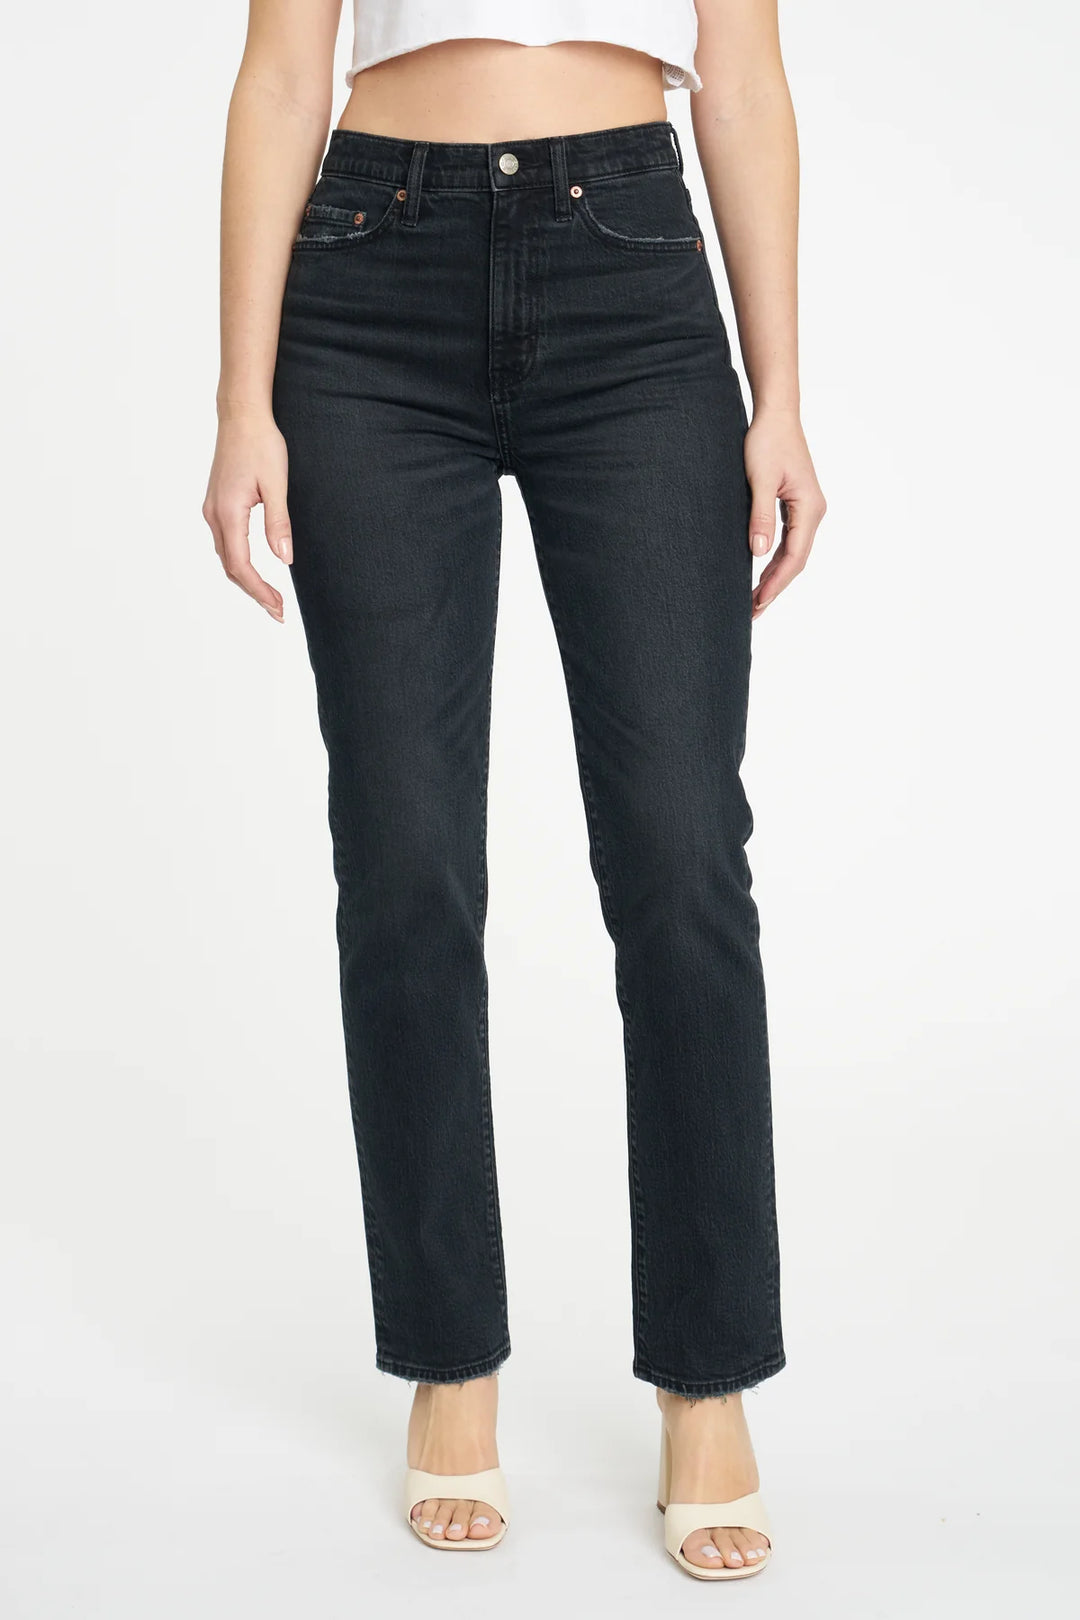 SMARTY PANTS HIGH RISE SLIM STRAIGHT JEAN